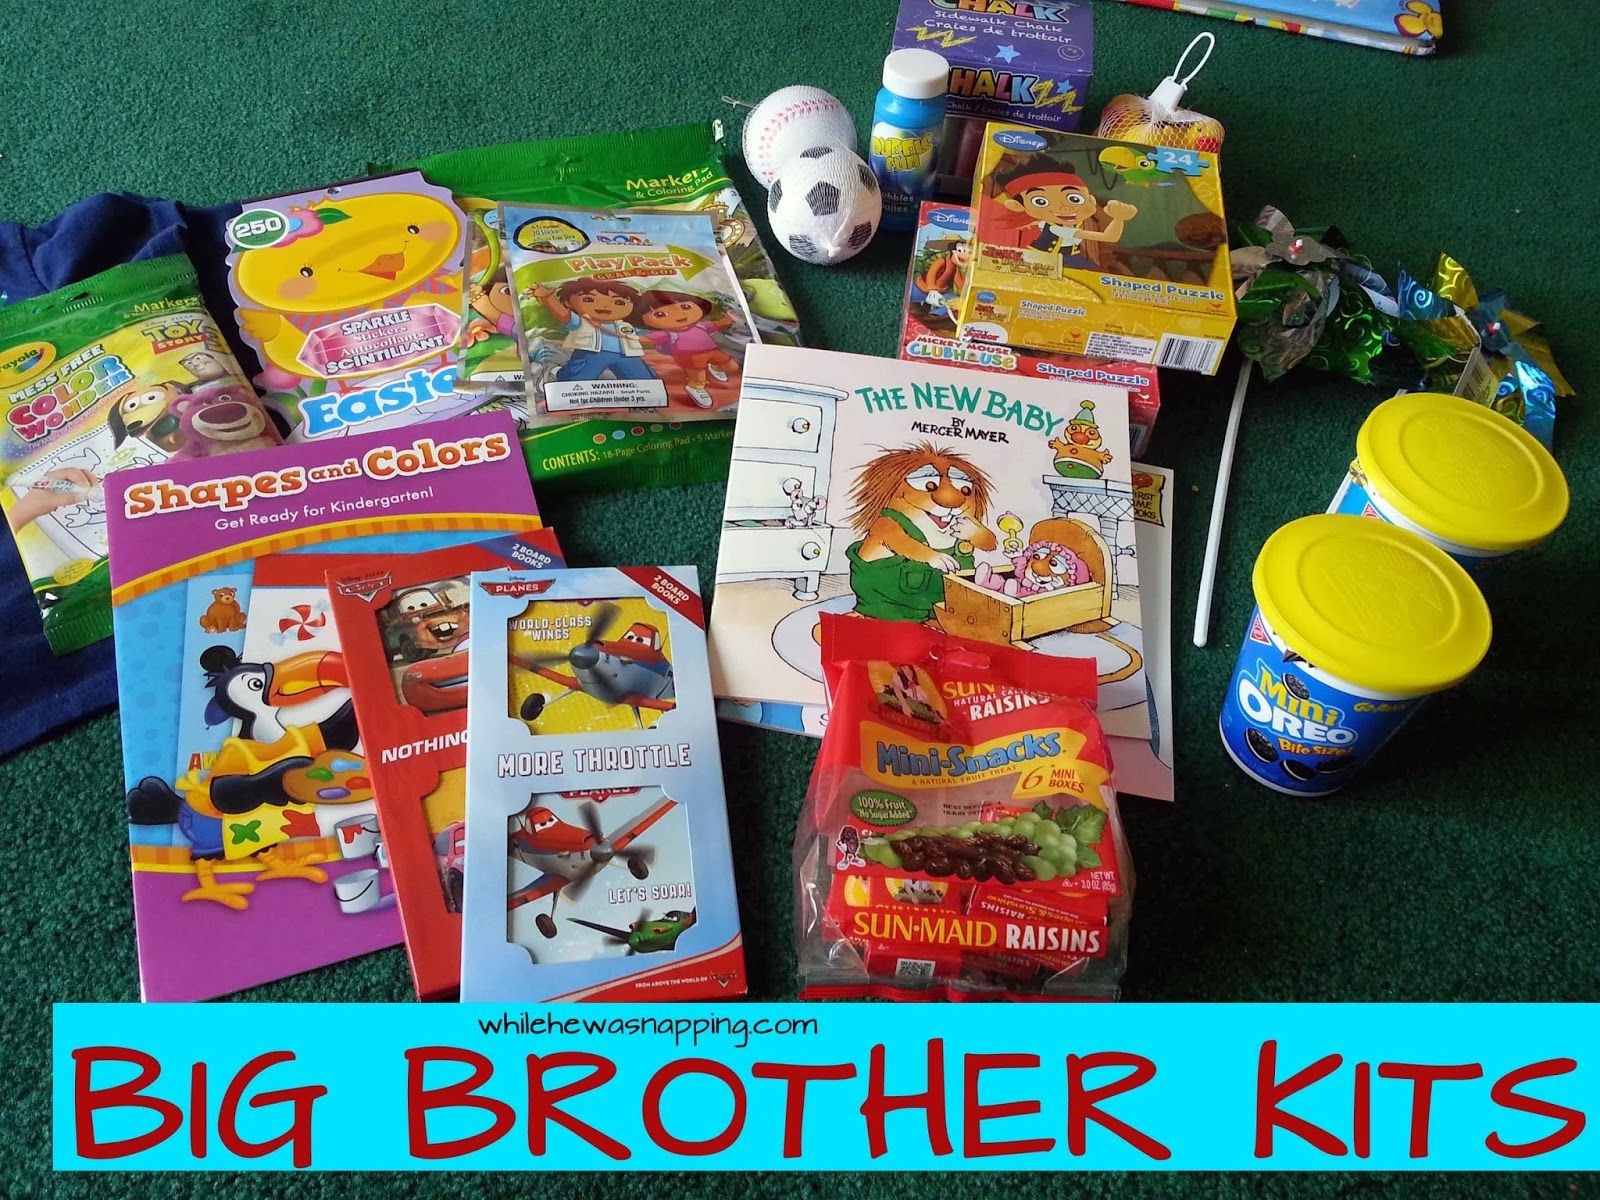 Gift Ideas For Big Brother From New Baby
 Big Sibling Kits From the Baby